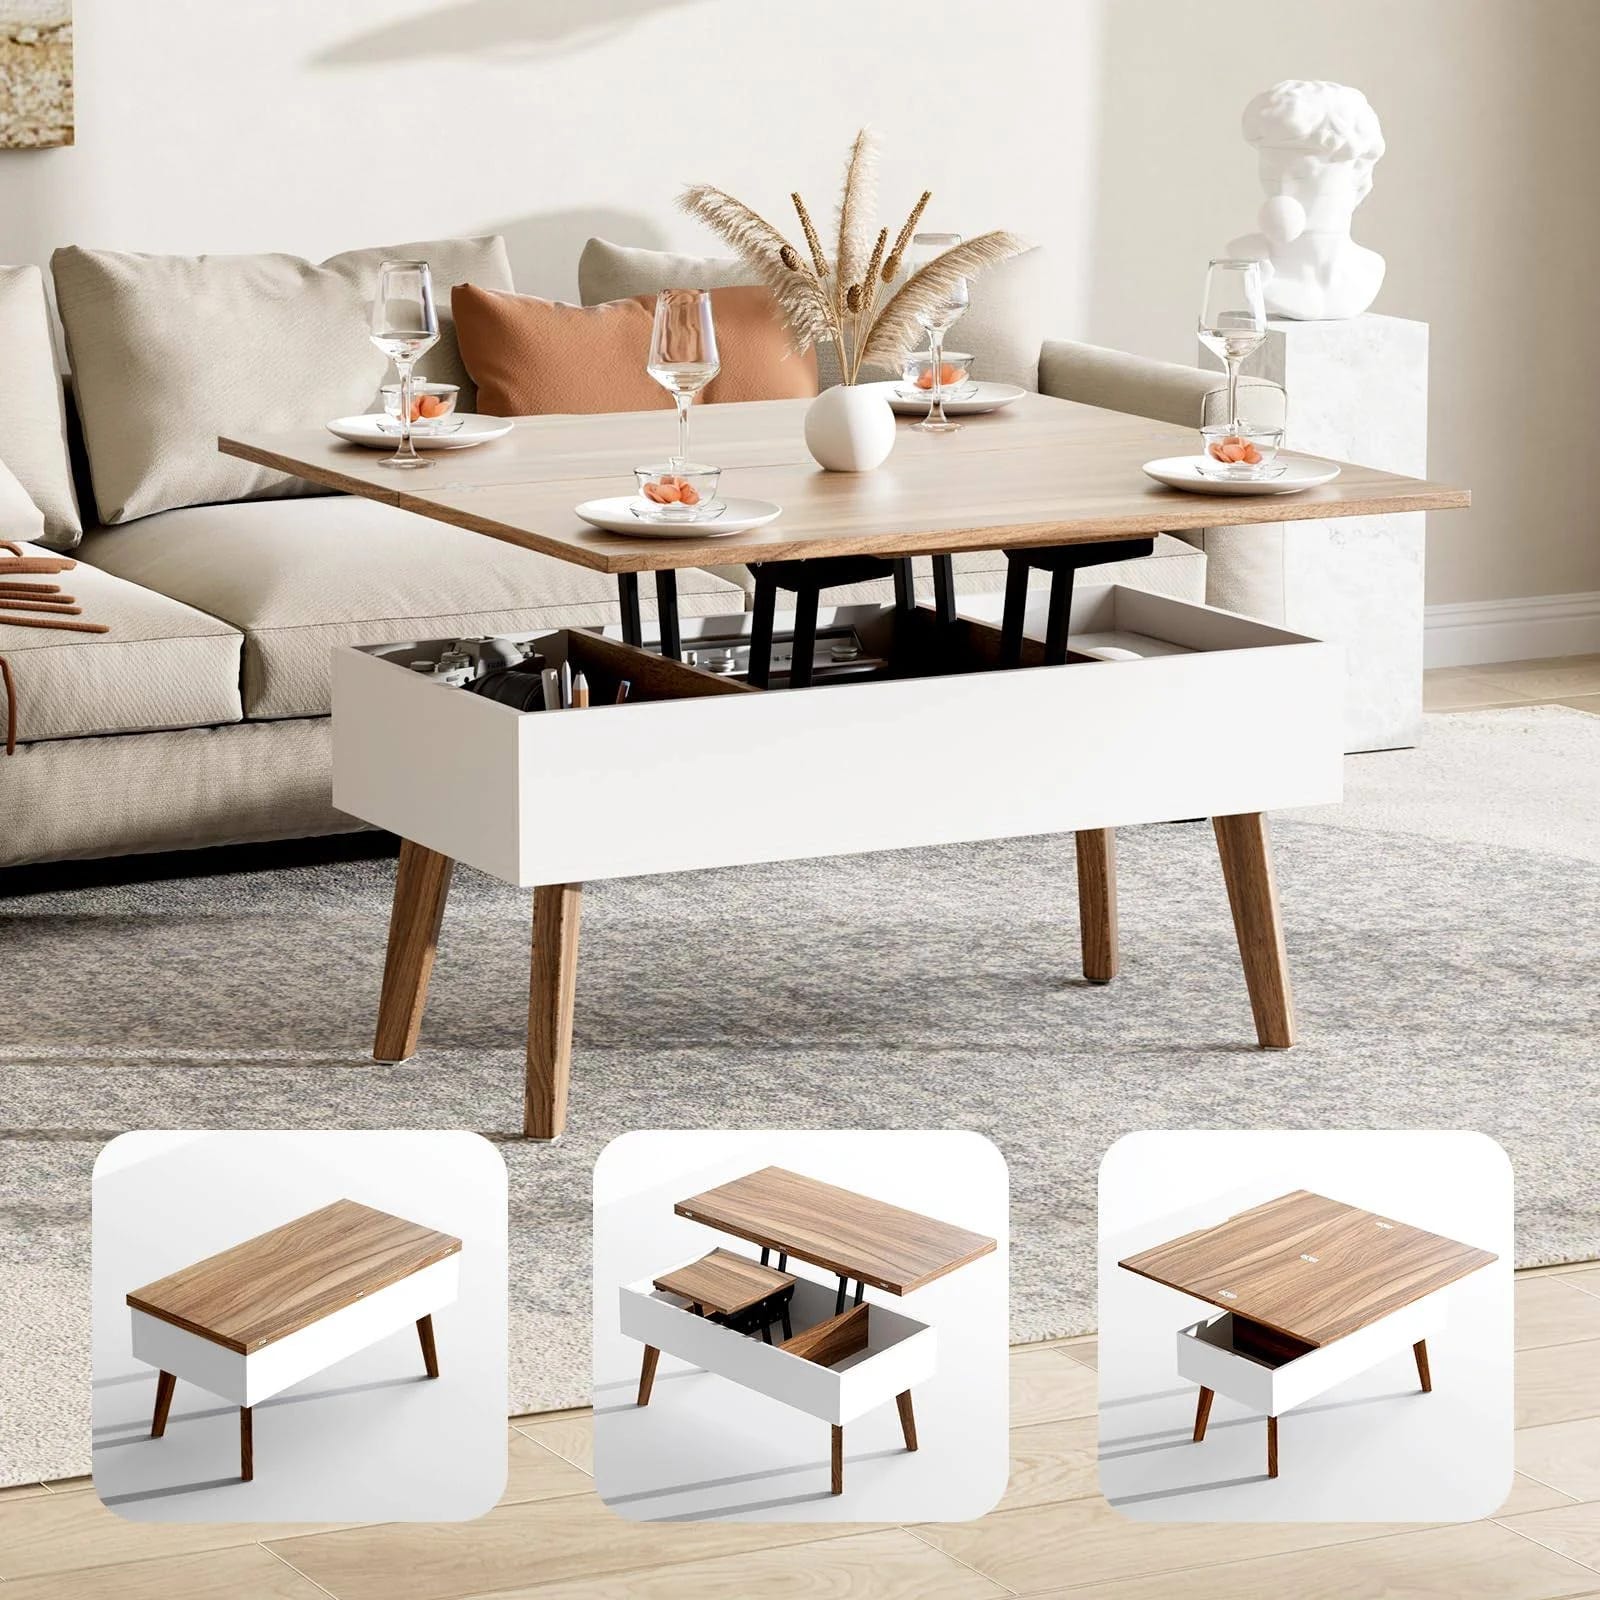 Multifunction Extendable Coffee Table with Hidden Storage | Image